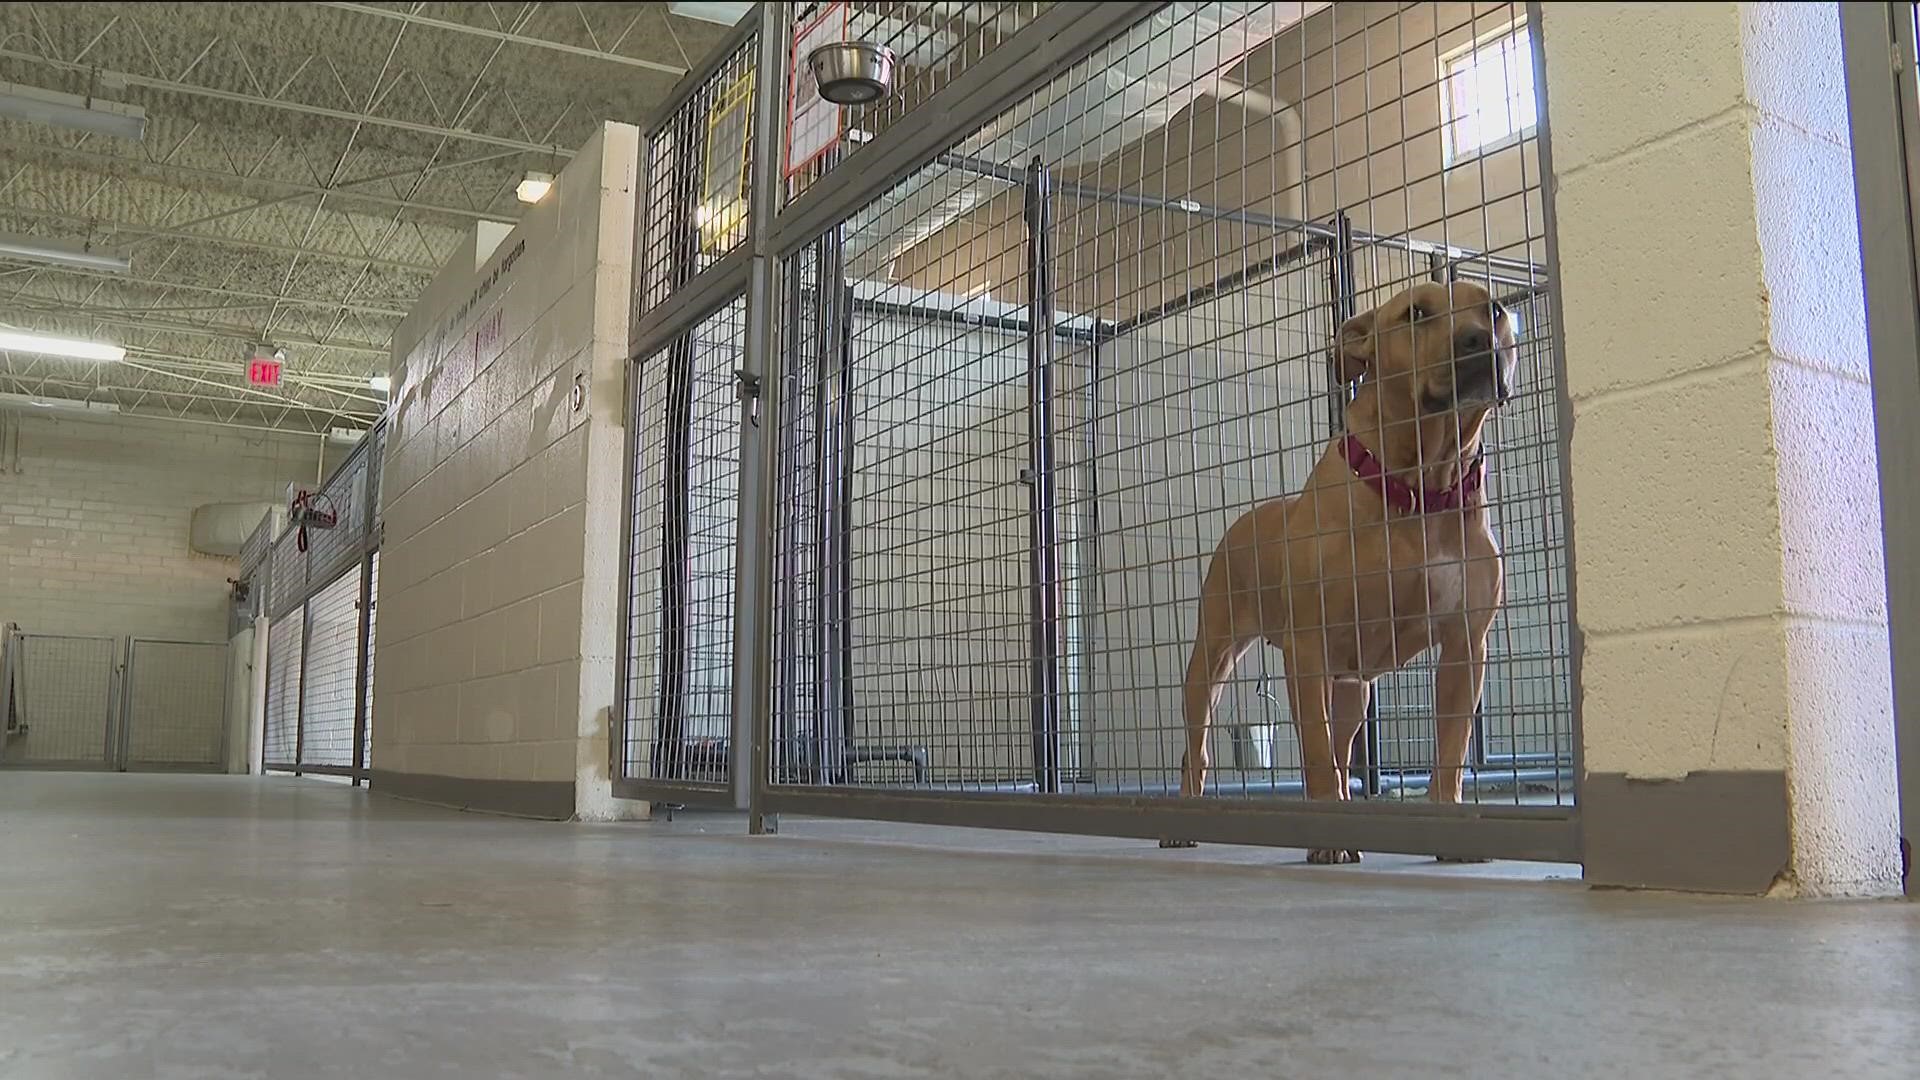 The program involved 10-week cycles in which inmate handlers would train with the dog to prepare the dog for adoption.